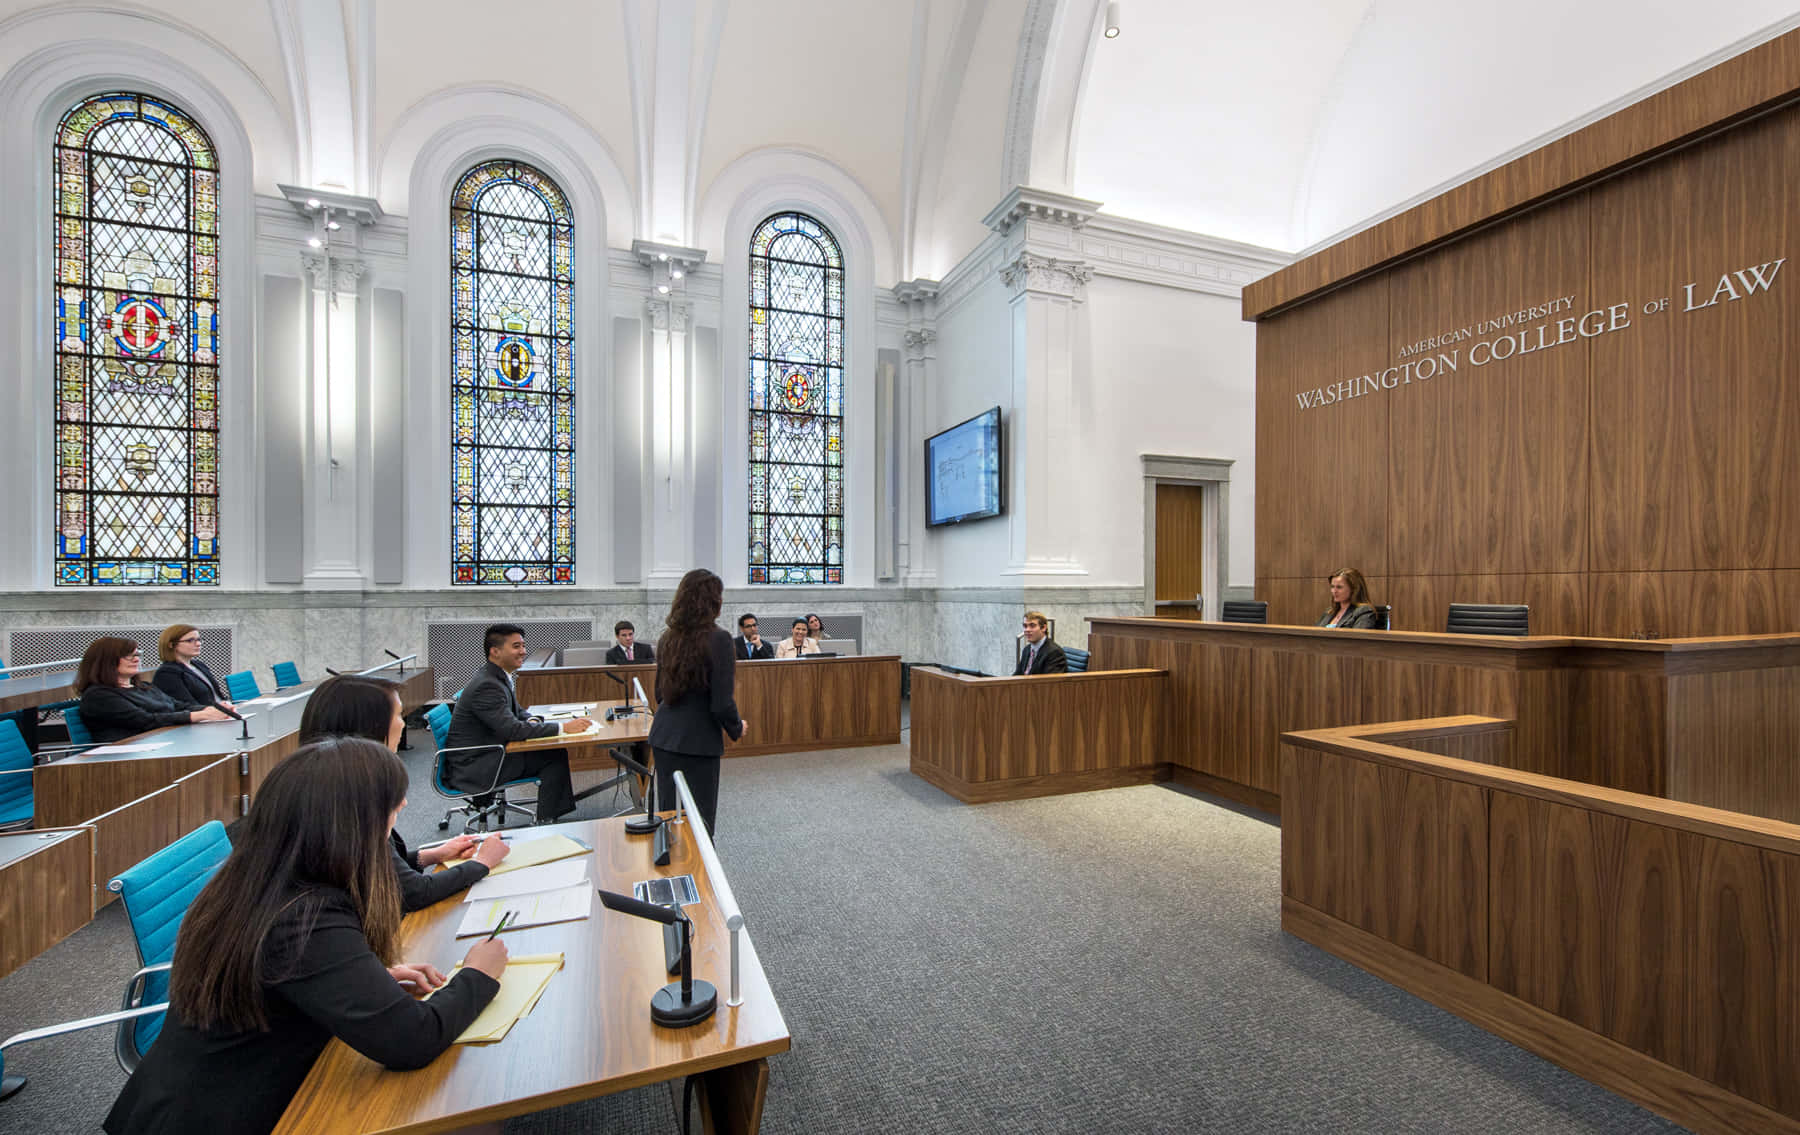 A Courtroom With People Sitting At Desks